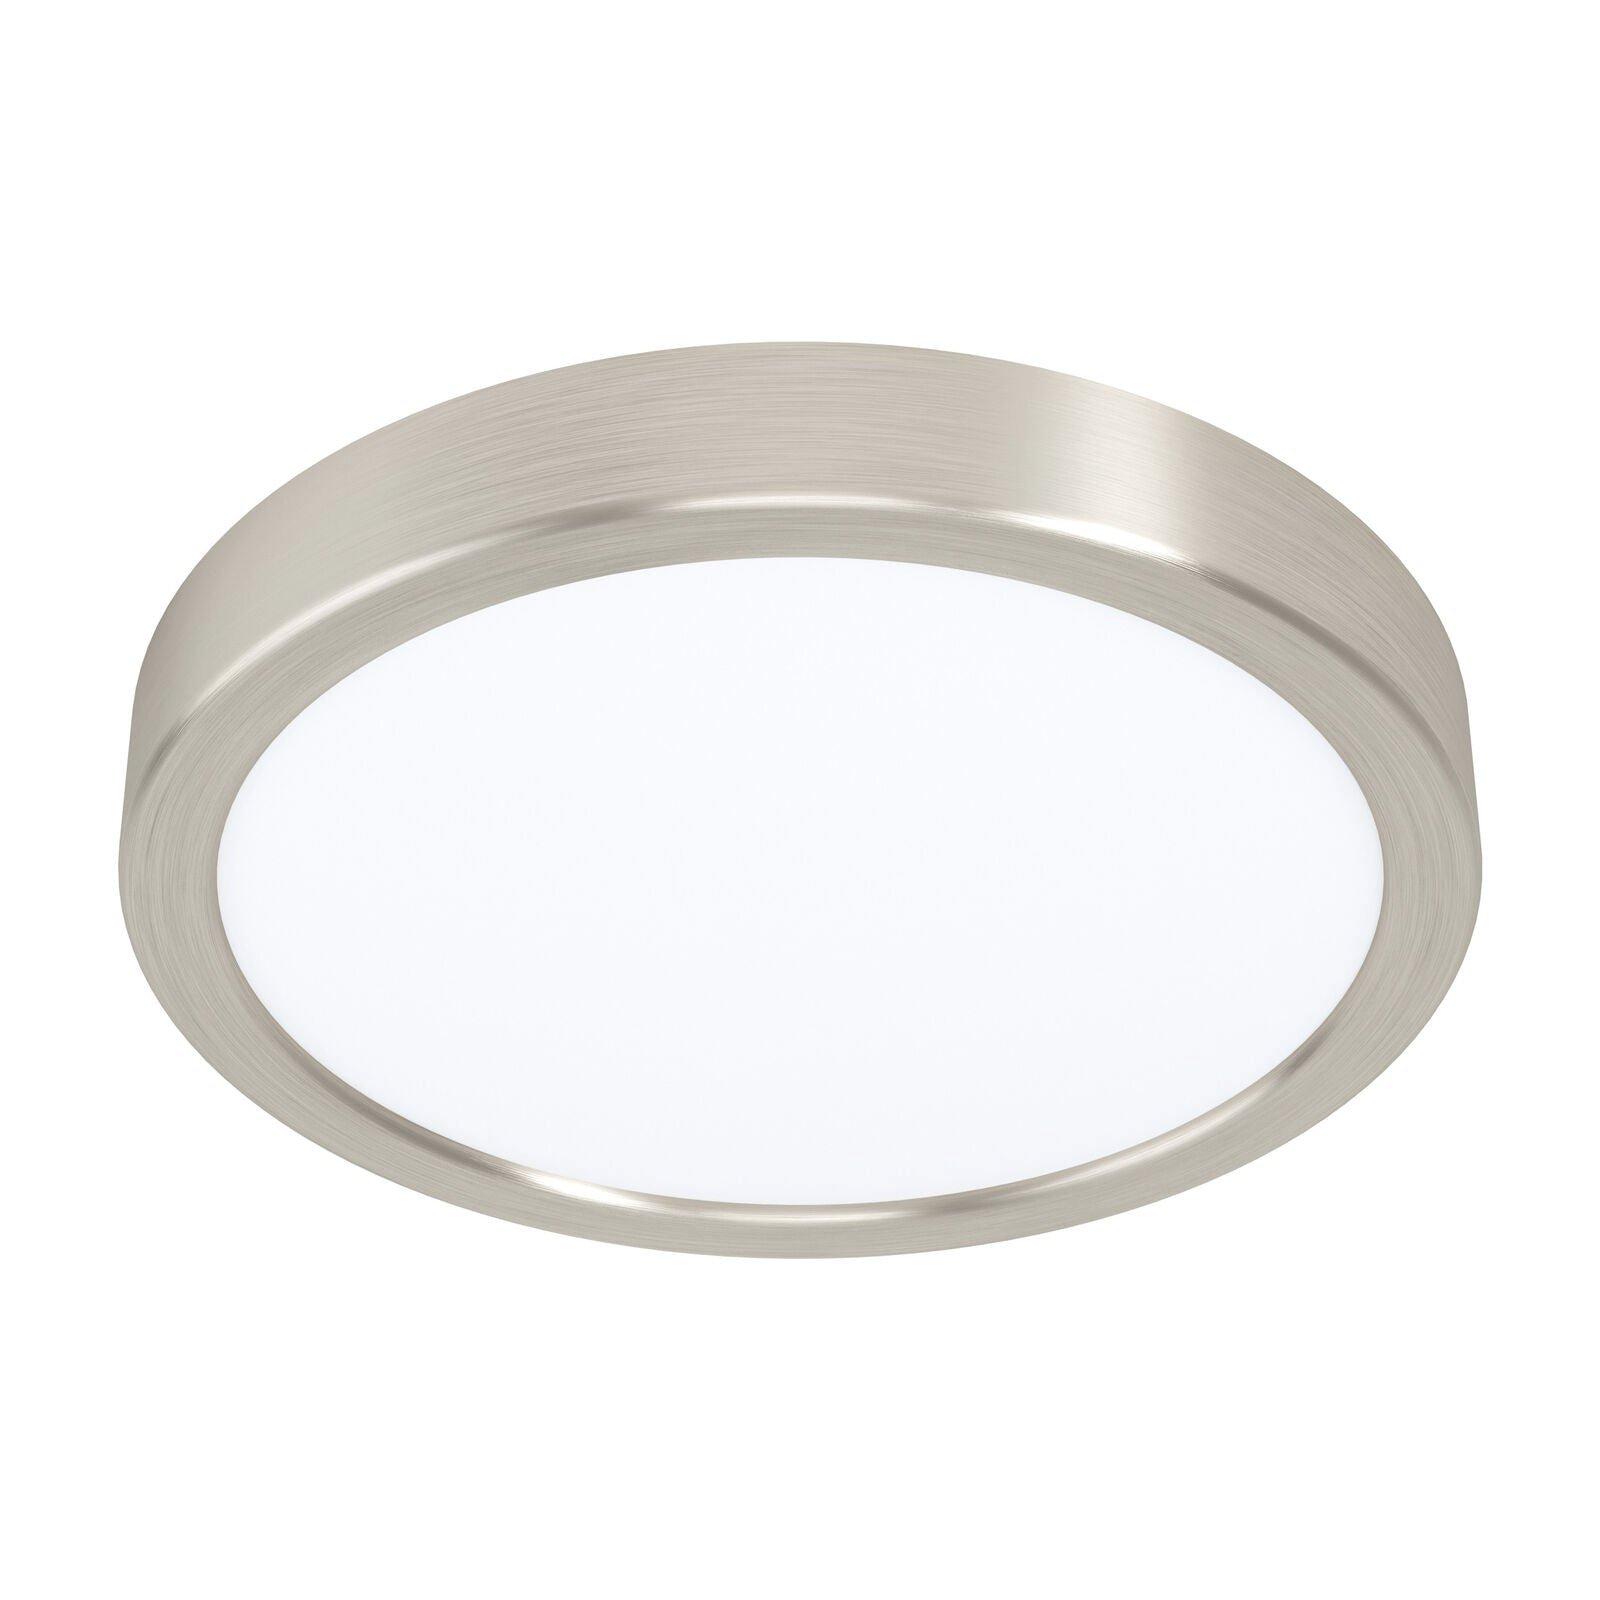 Wall / Ceiling Light Satin Nickel 210mm Round Surface Mounted 16.5W LED 3000K